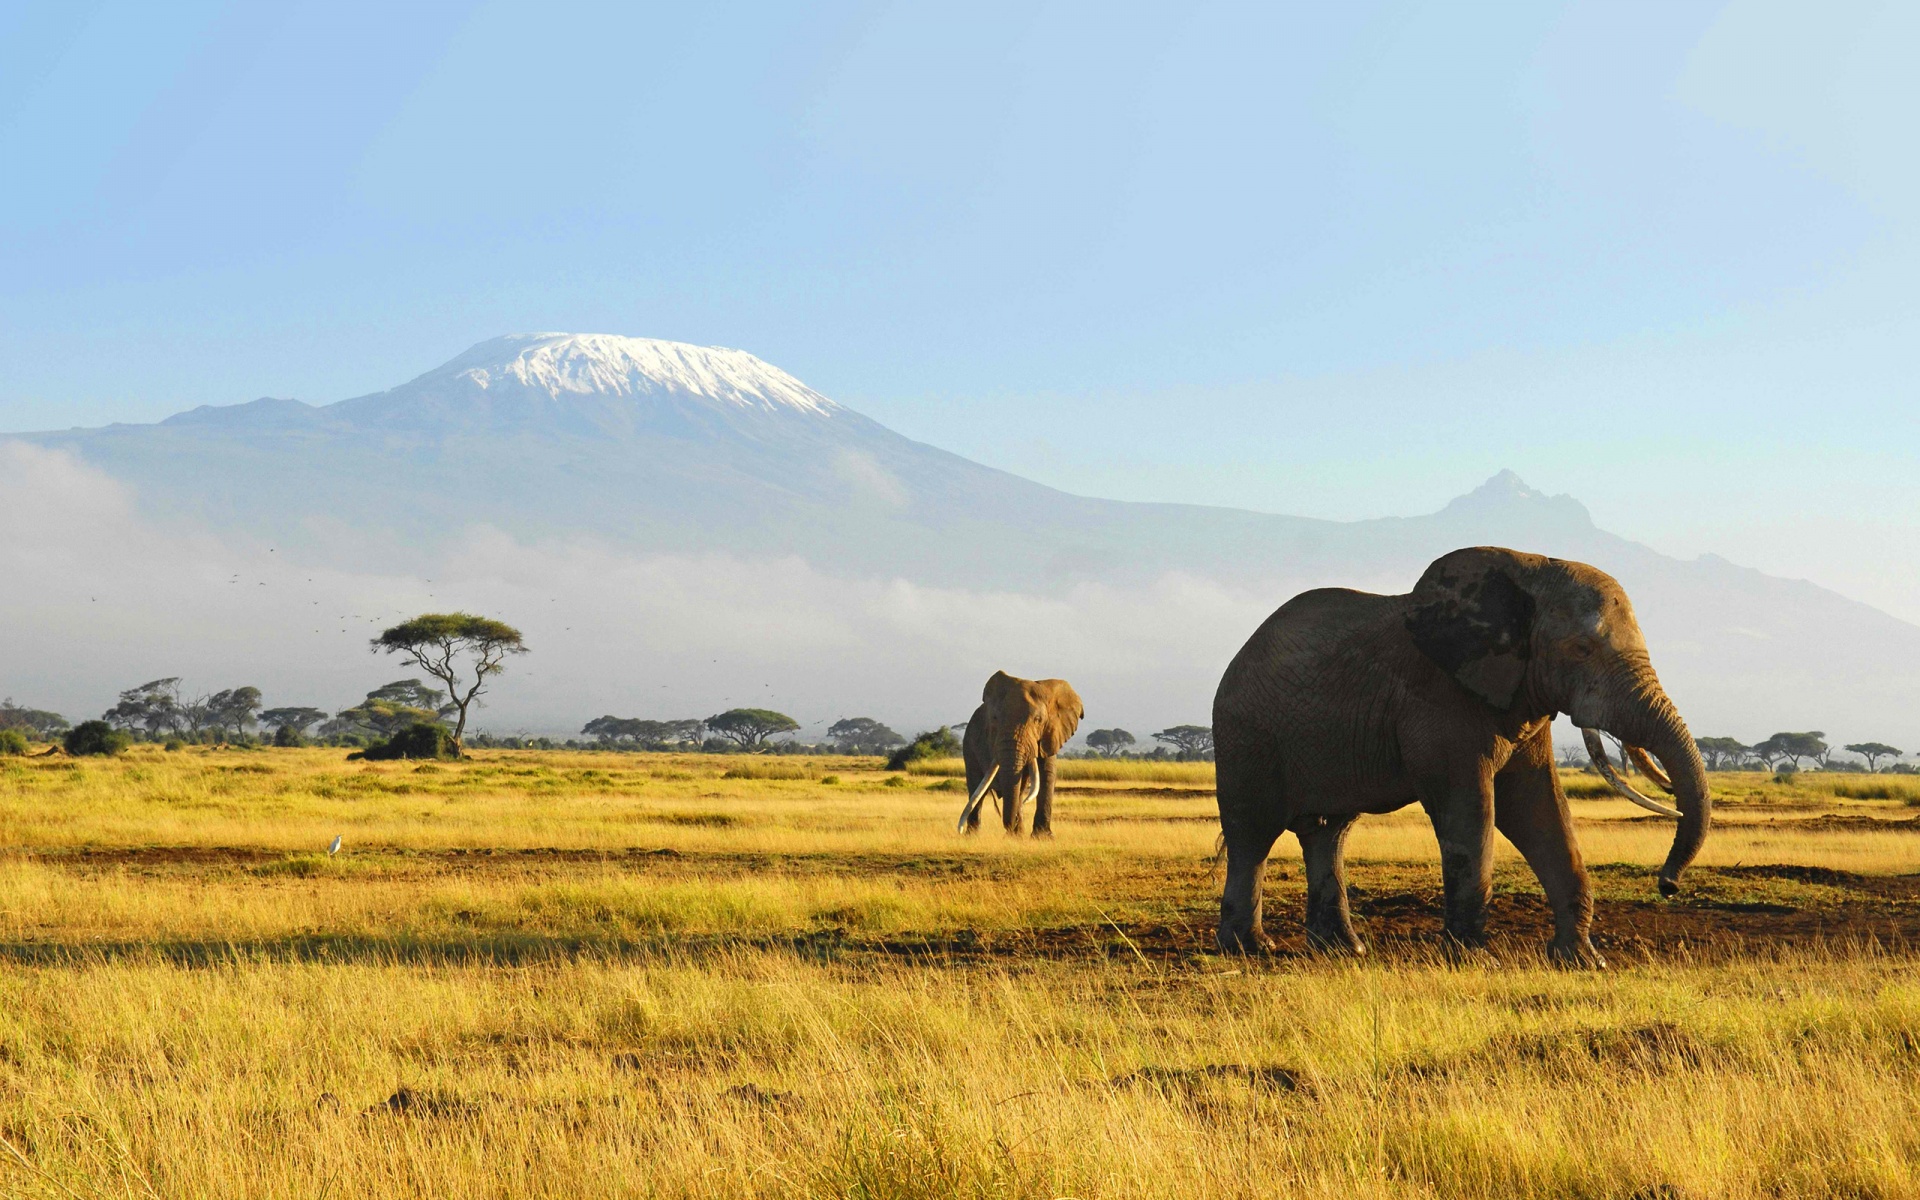 Huge Safari Laptop Photos, G - Elephant With Forest Background - 1920x1200  Wallpaper 